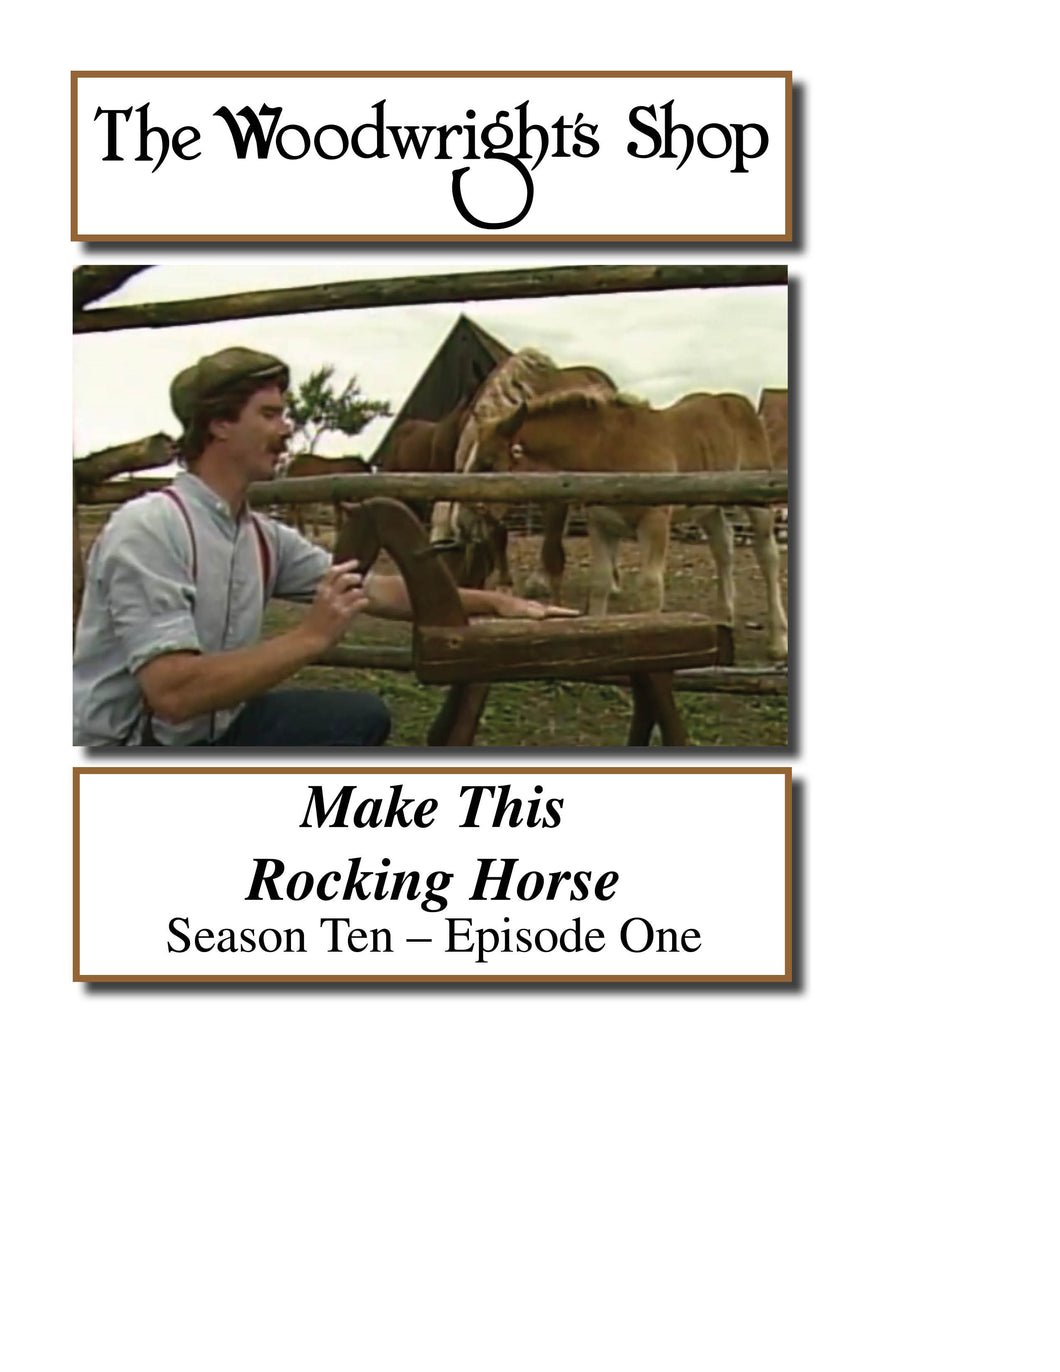 The Woodwright's Shop, Season 10, Episode 1 - Make this Rocking Horse Video Download